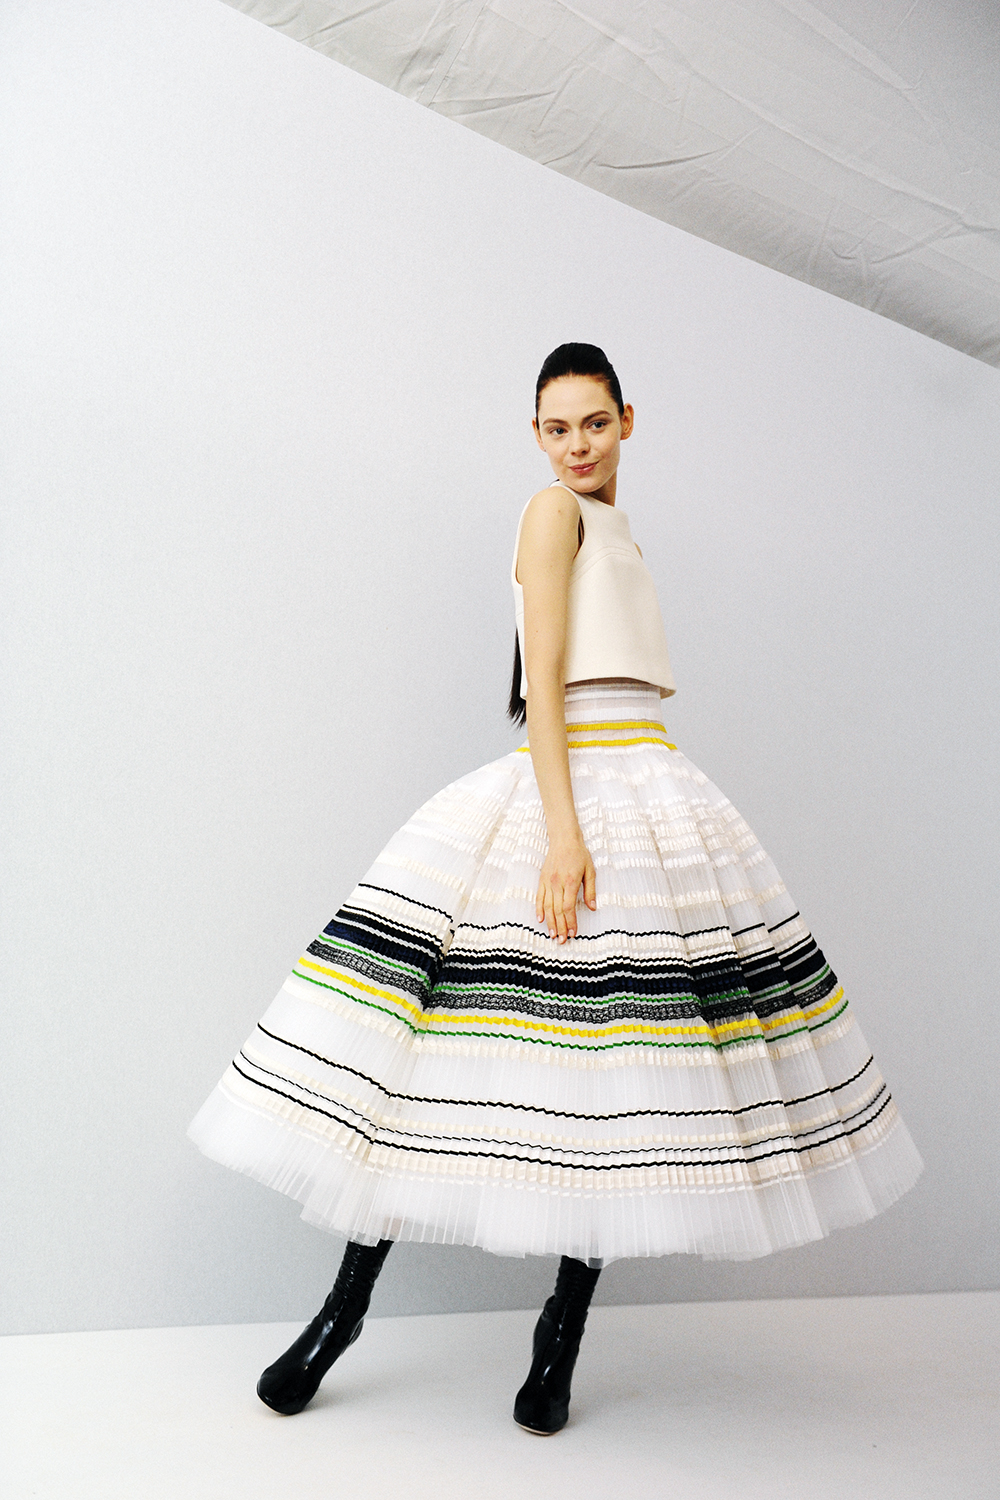 BACKSTAGE AT DIOR HAUTE COUTURE SPRING 